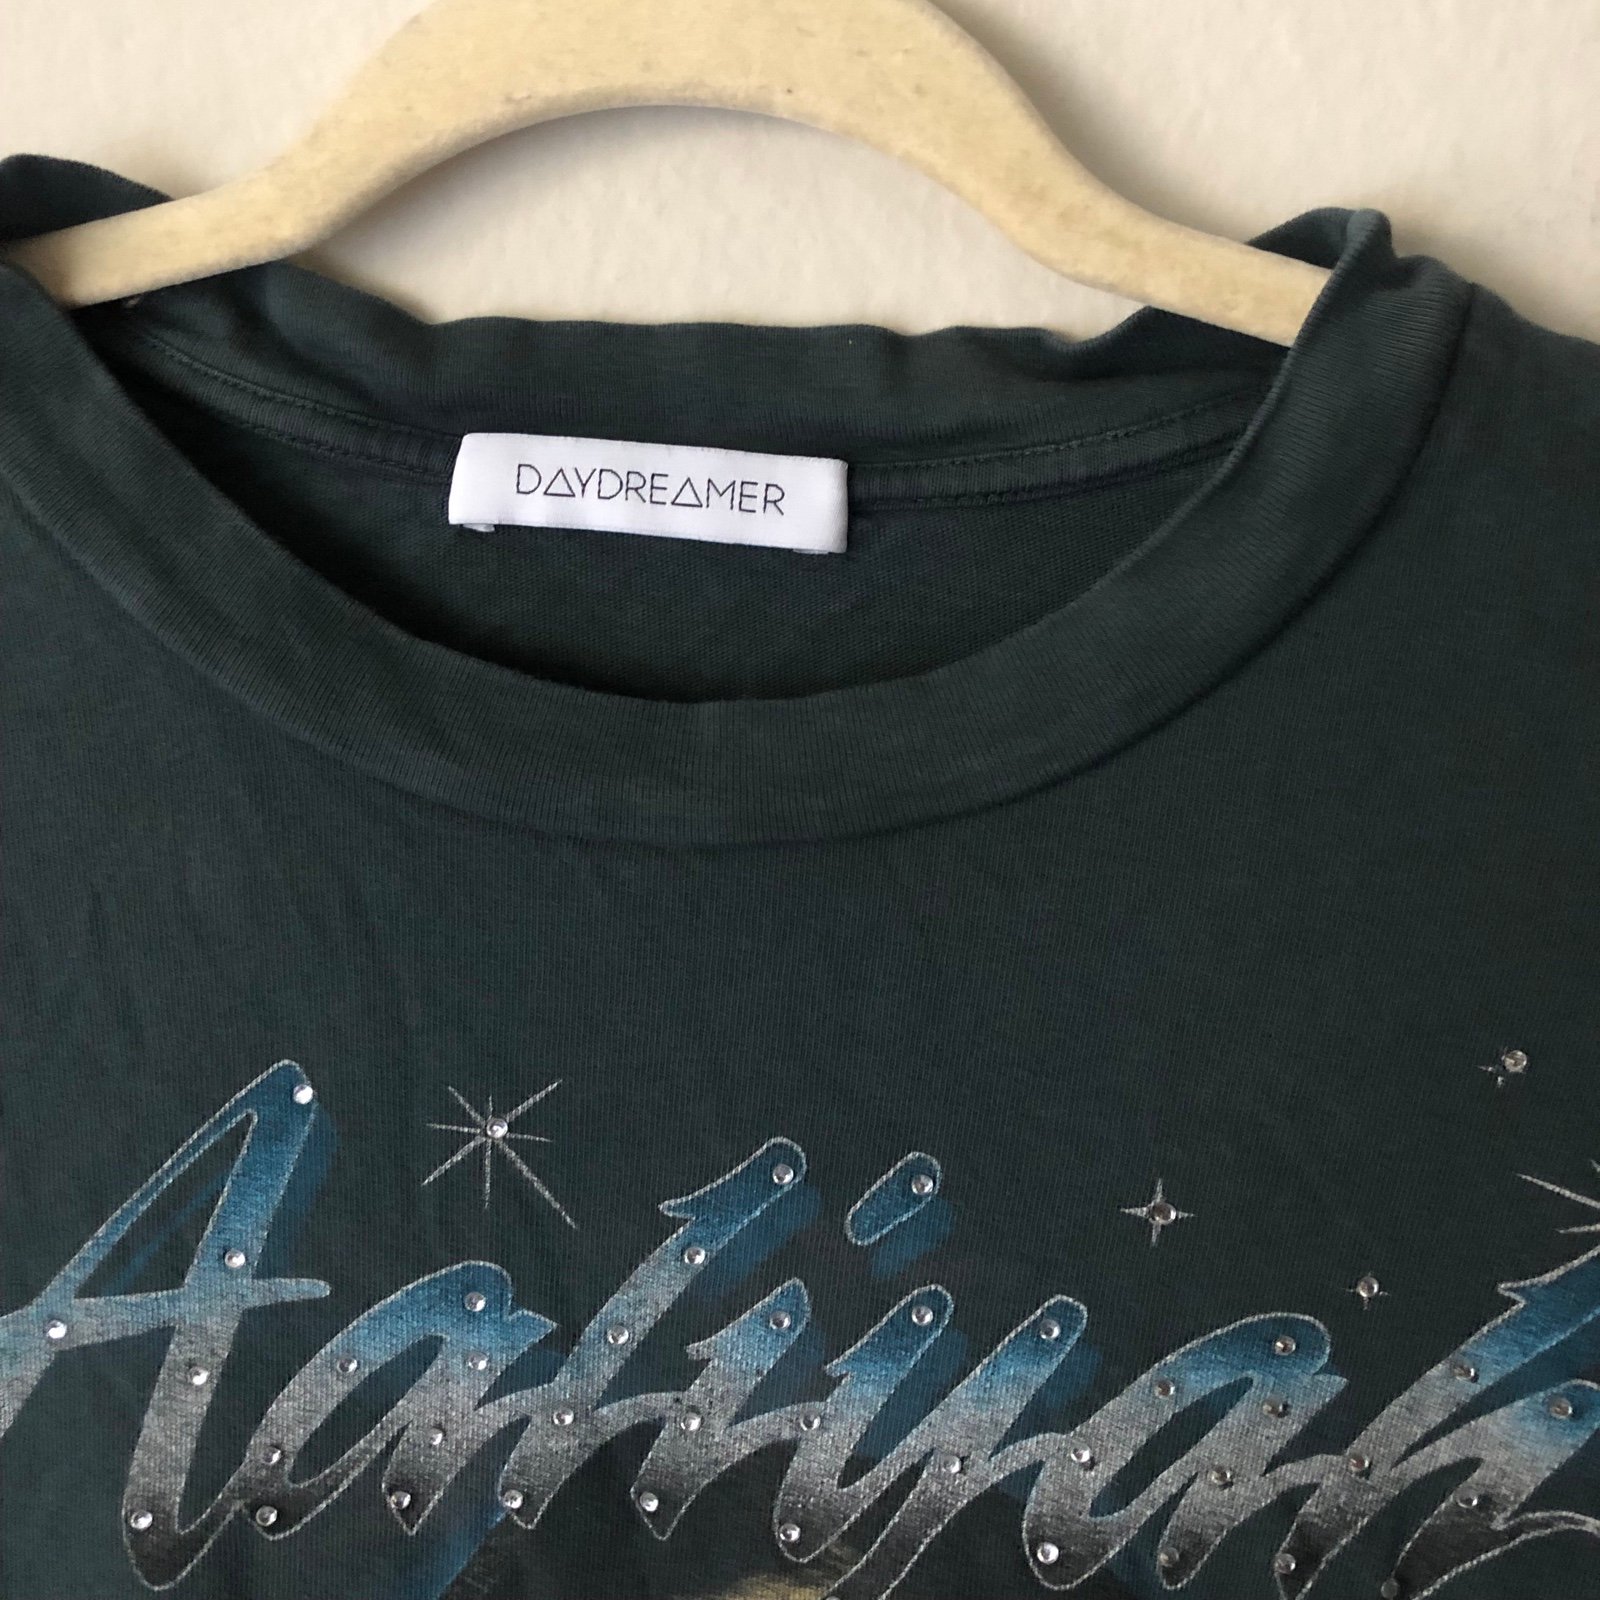 High quality Daydreamer Aaliyah One In A Million Weekend Tee in Vintage Black Size Large O0qWNmnlU for sale